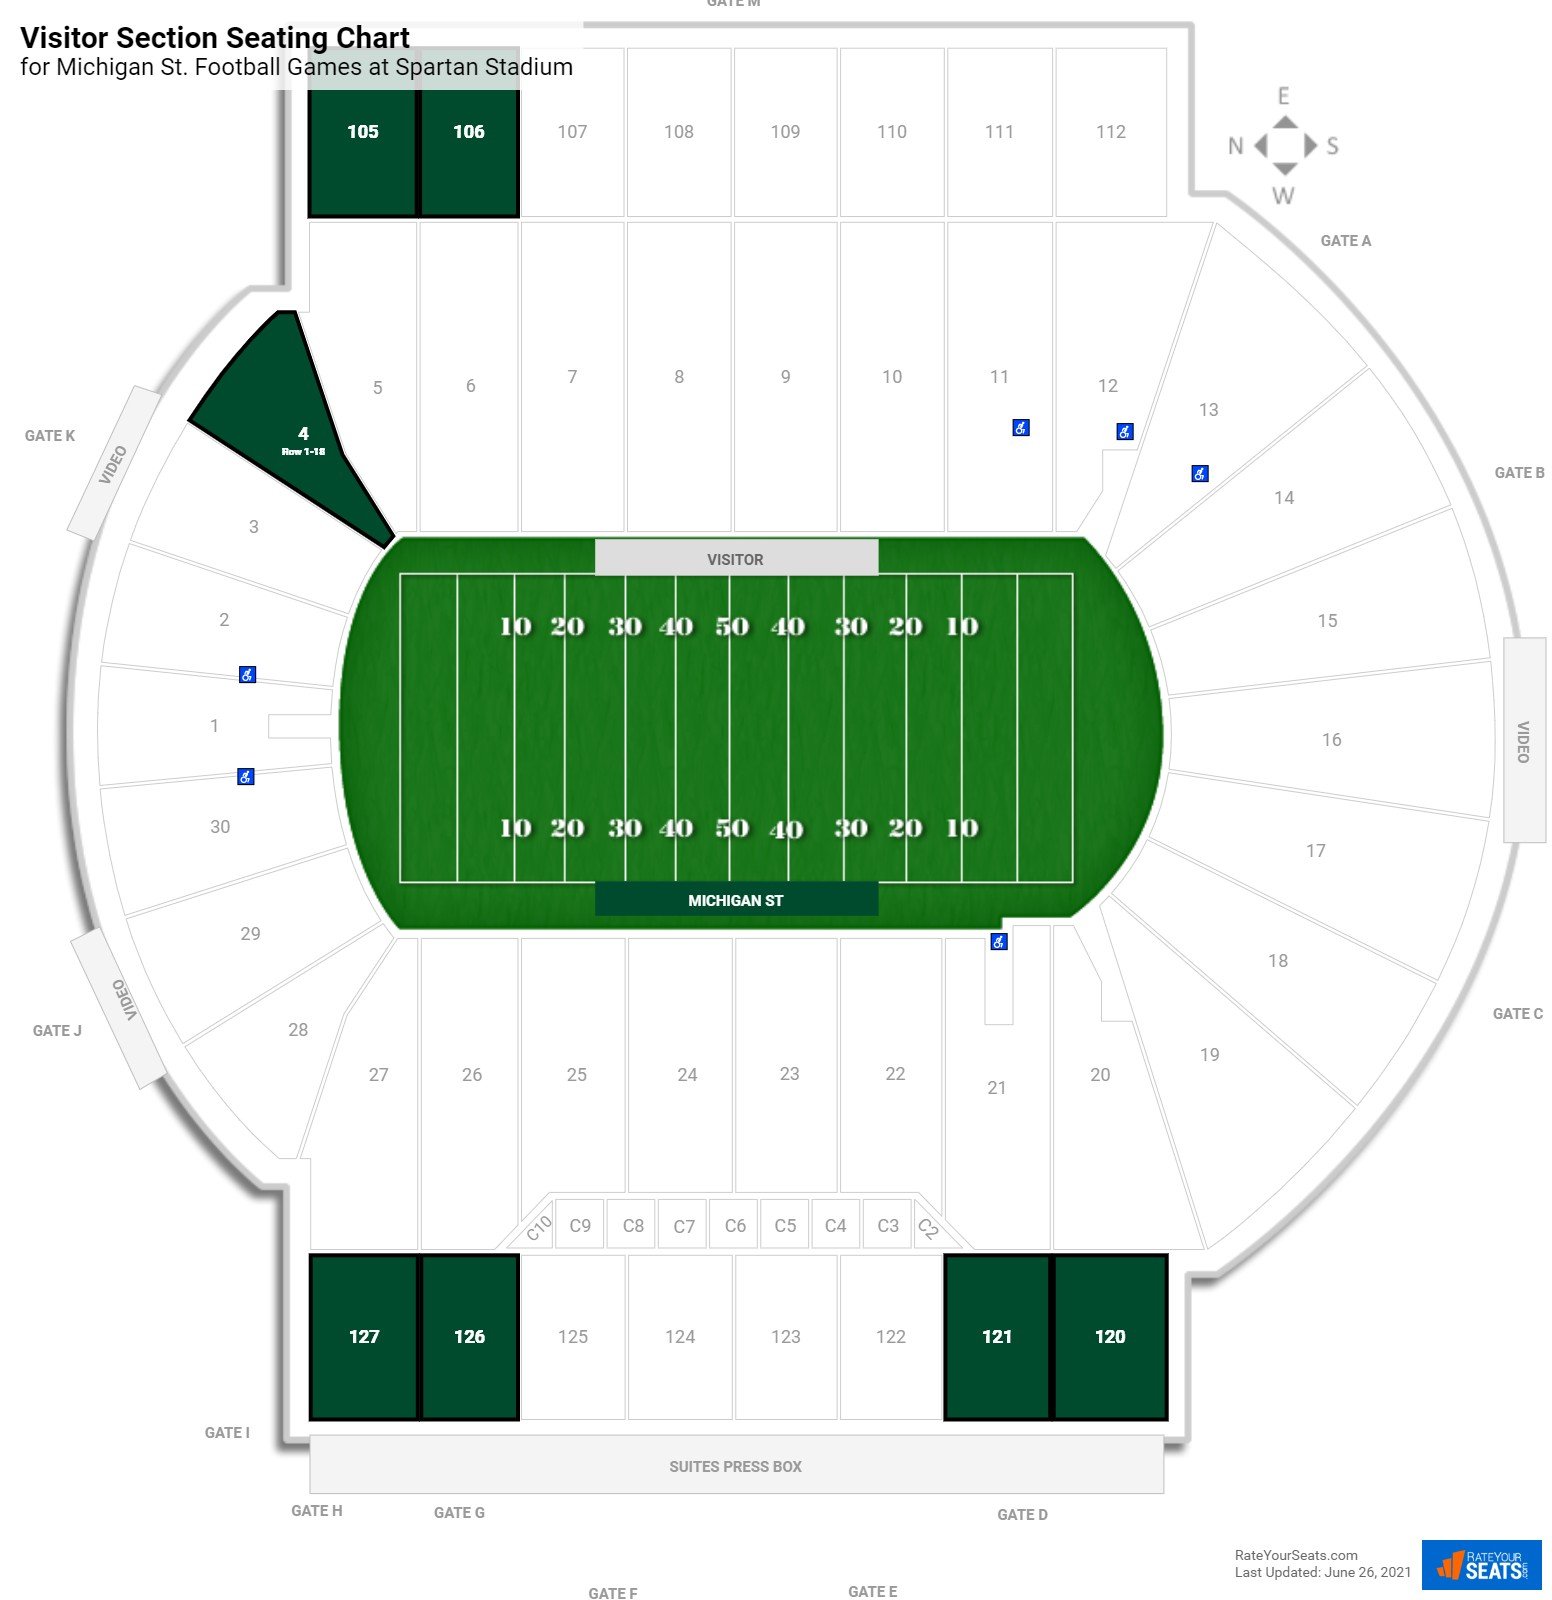 Michigan St. Visitor Section Seating Chart at Spartan Stadium